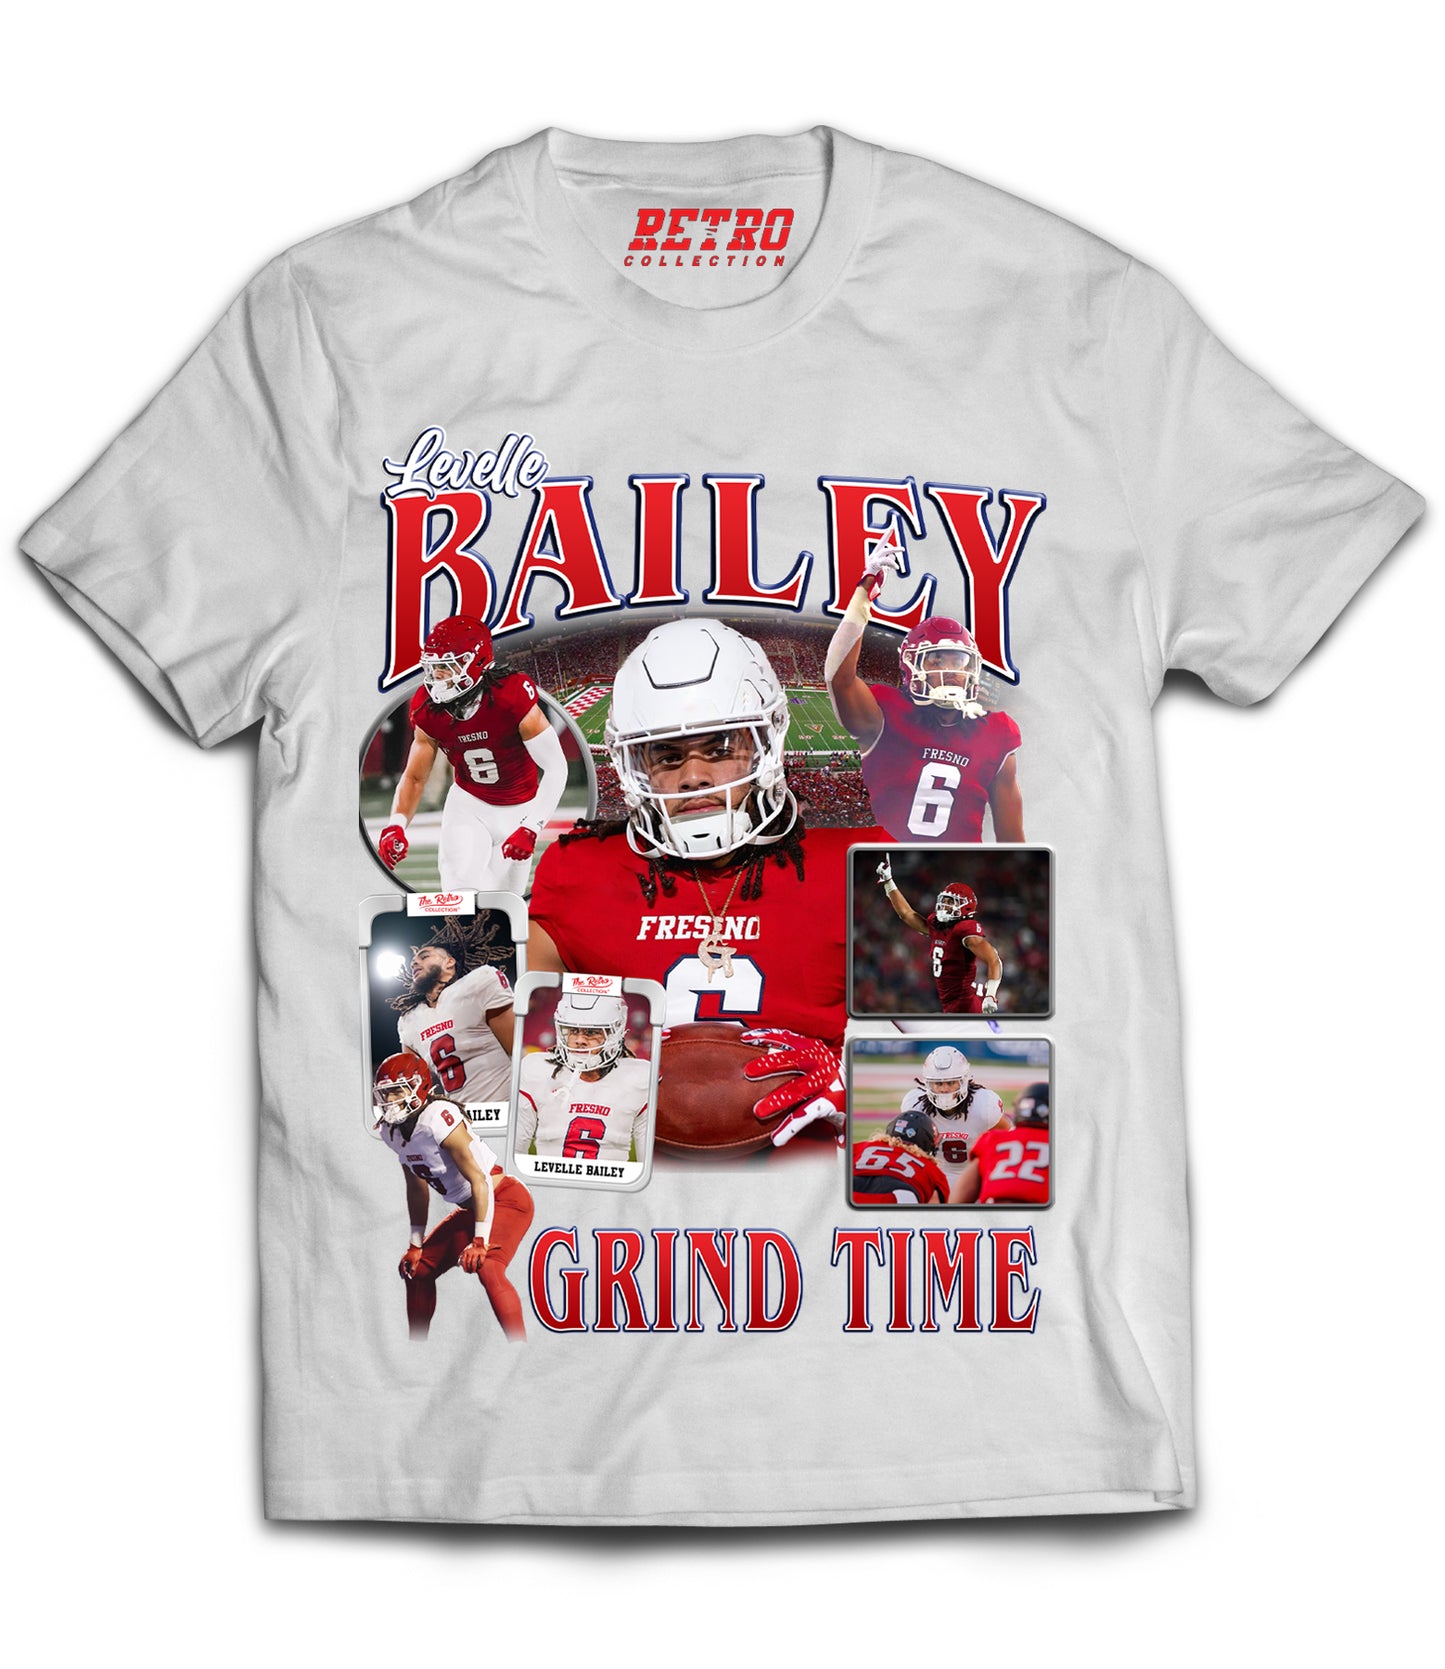 Levelle Bailey "GRIND TIME-DROP 2" Tribute Shirt *LIMITED EDITION* (Black, Red, White)